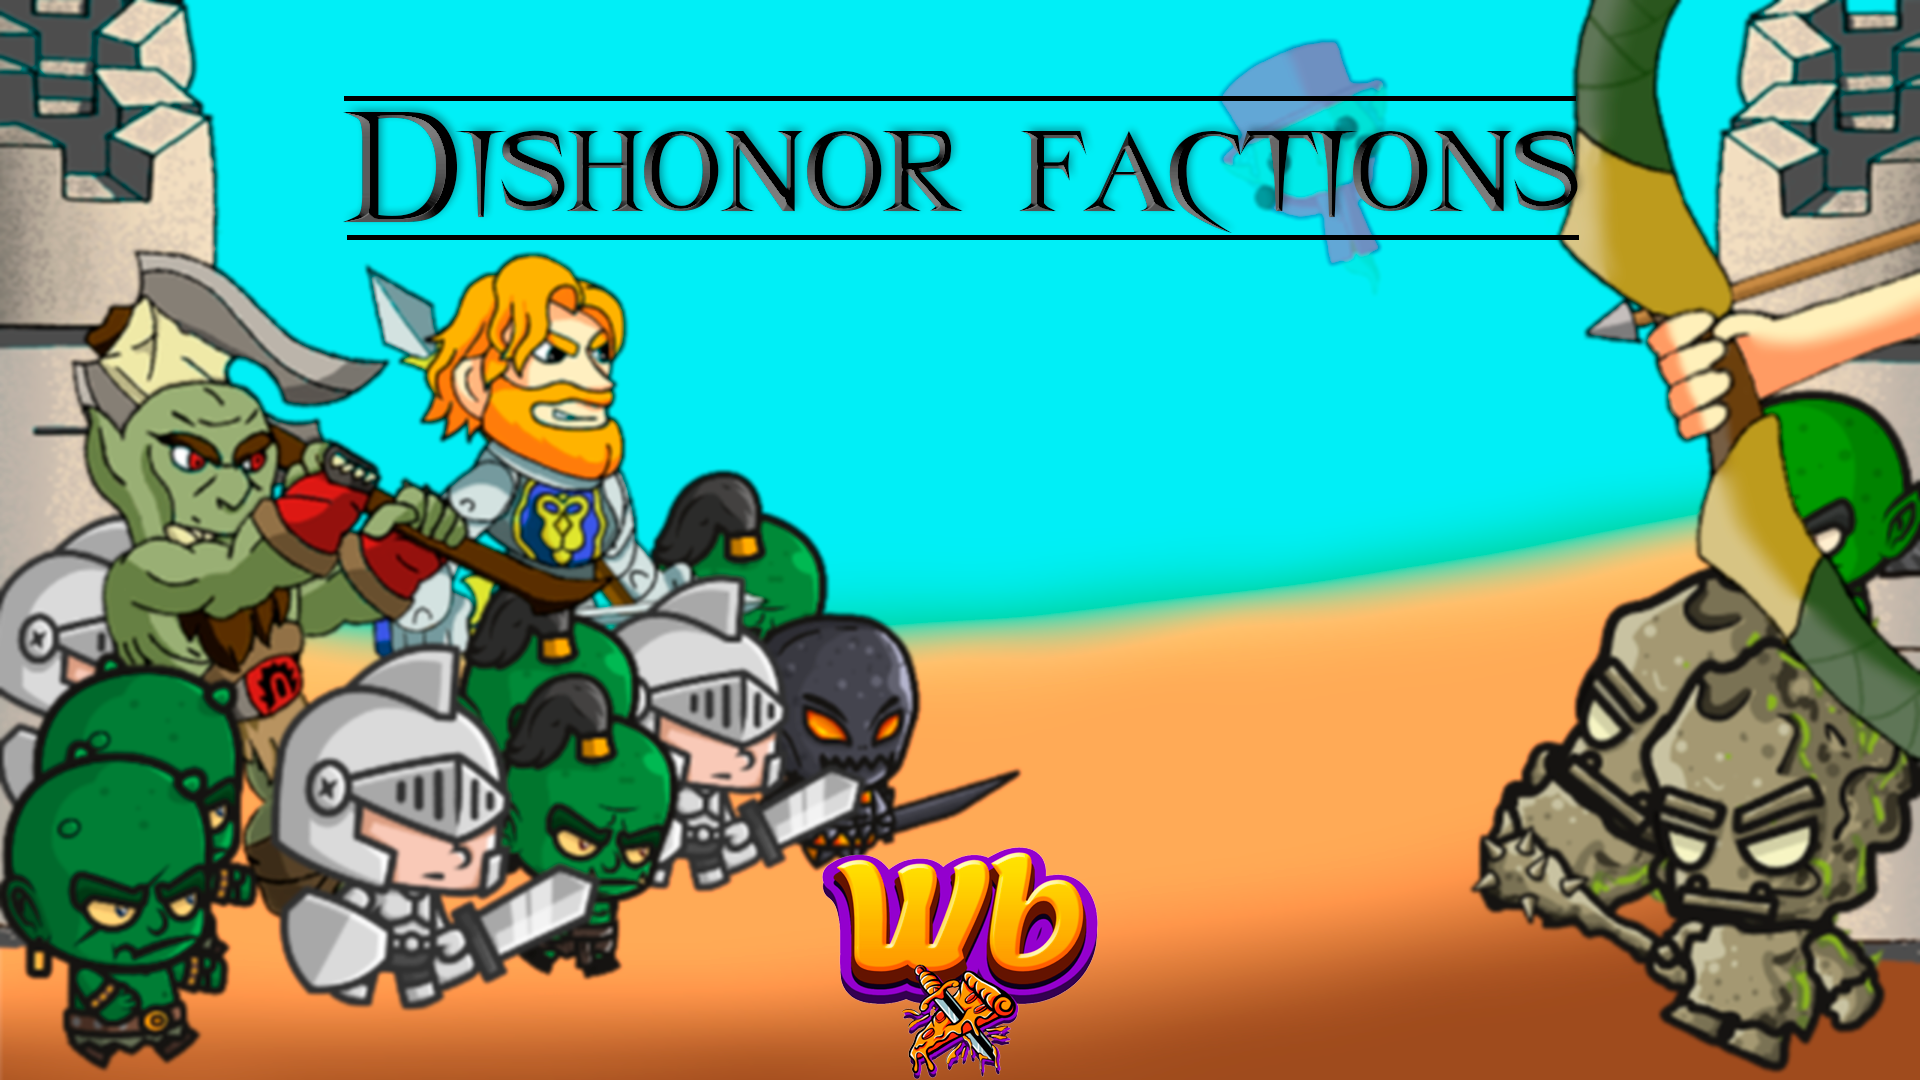 Dishonor Factions